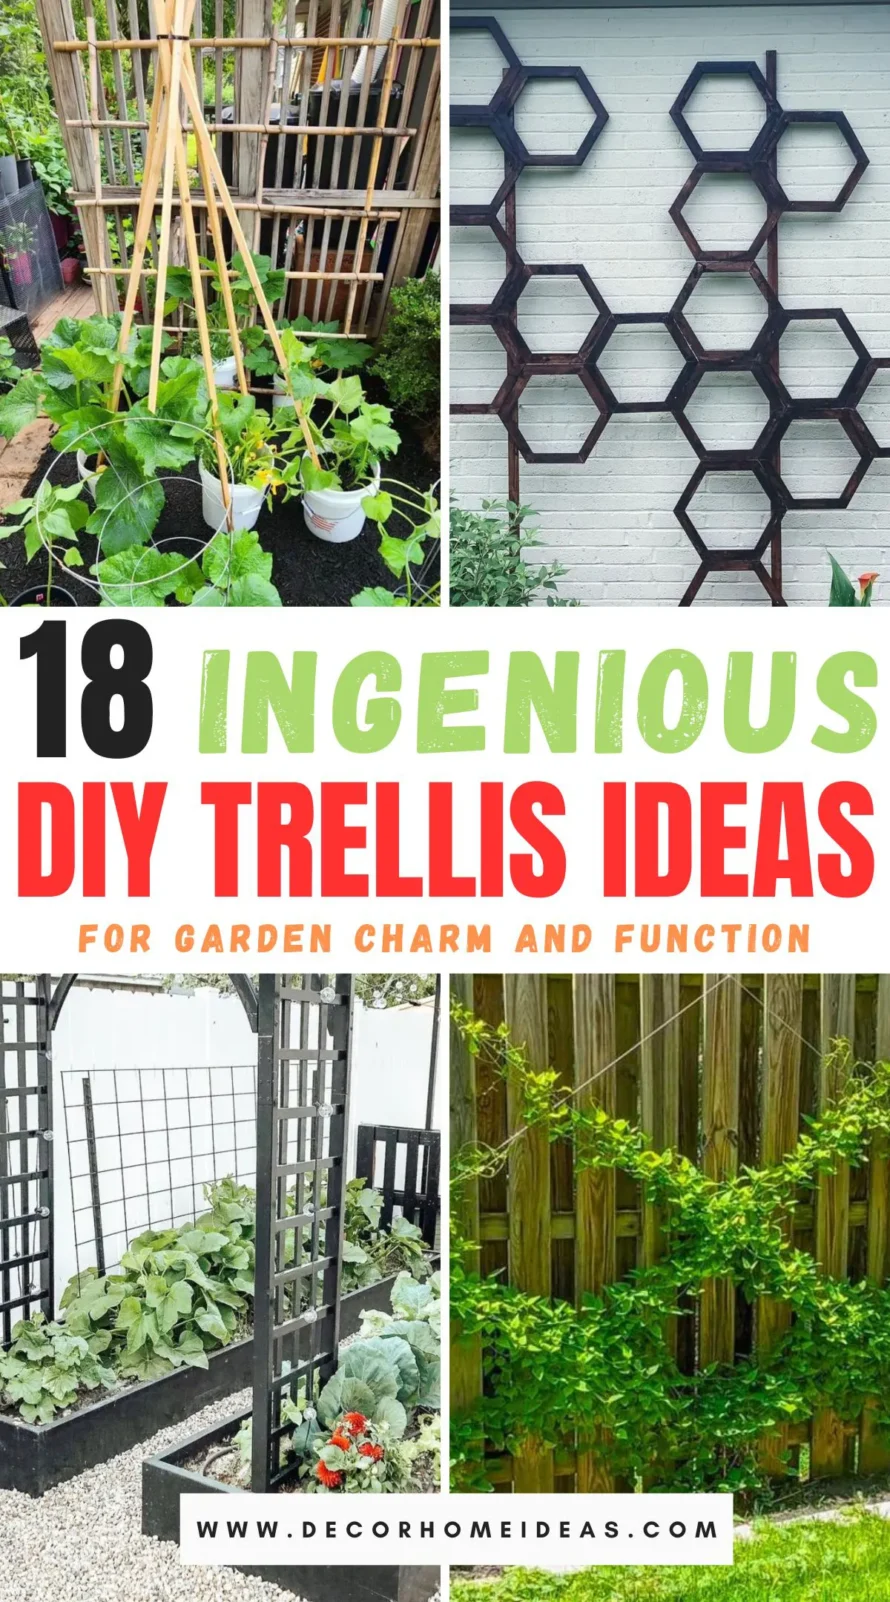 Transform your garden into a lush oasis with these 18 ingenious DIY trellis ideas. From simple designs to intricate patterns, discover creative ways to support climbing plants while adding charm and character to your outdoor space.